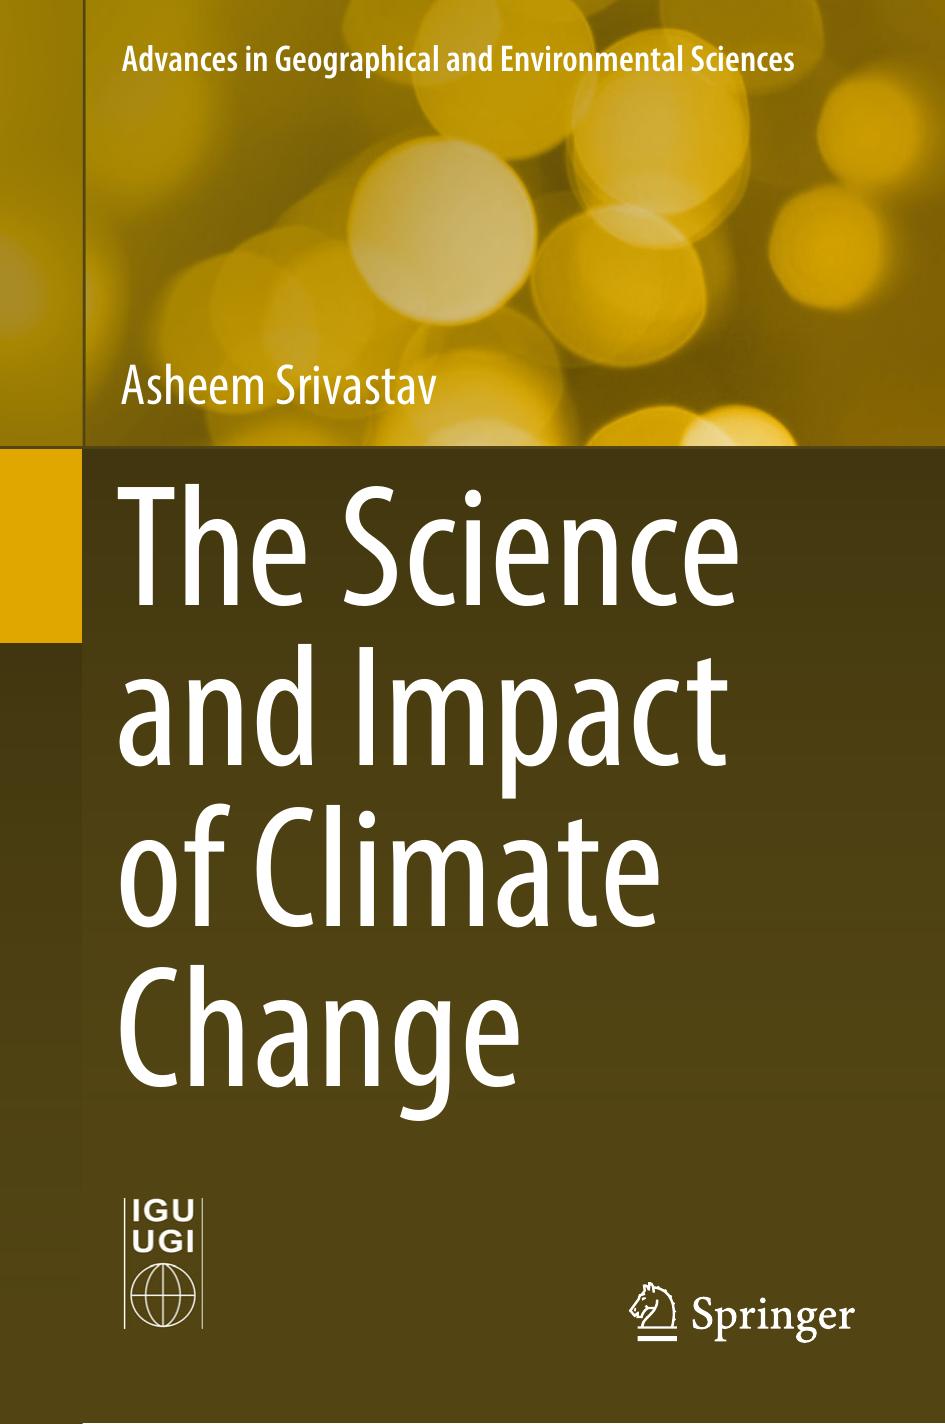 The Science and Impact of Climate Change by Asheem Srivastav